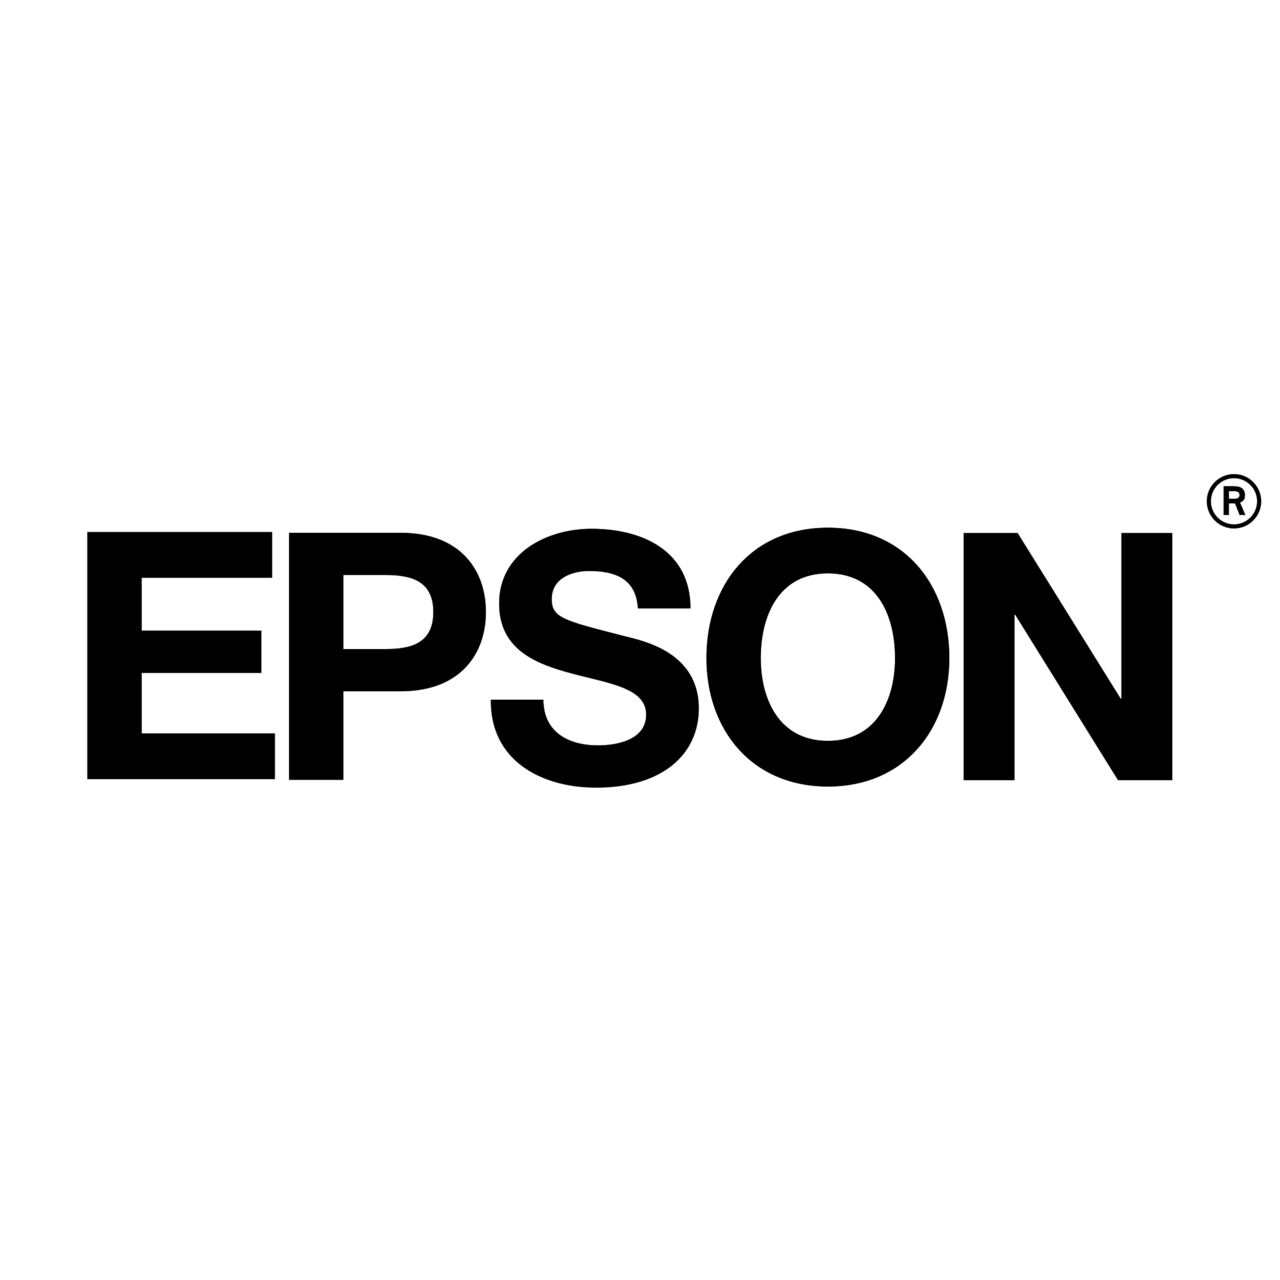 epson-logo-black-and-white.png